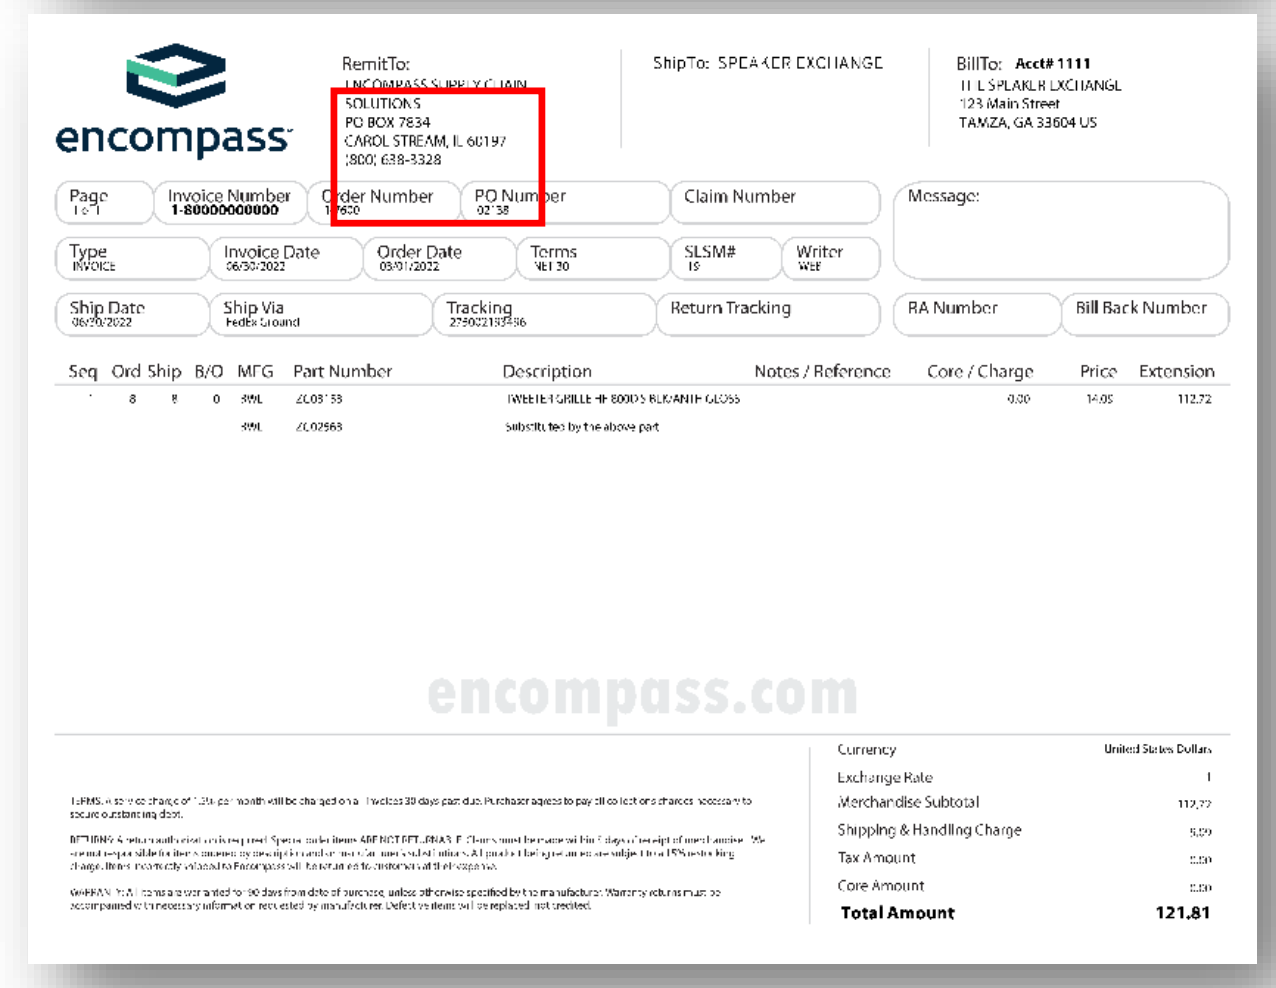 Image is showing an example of a Encompass invoice with remittance information.